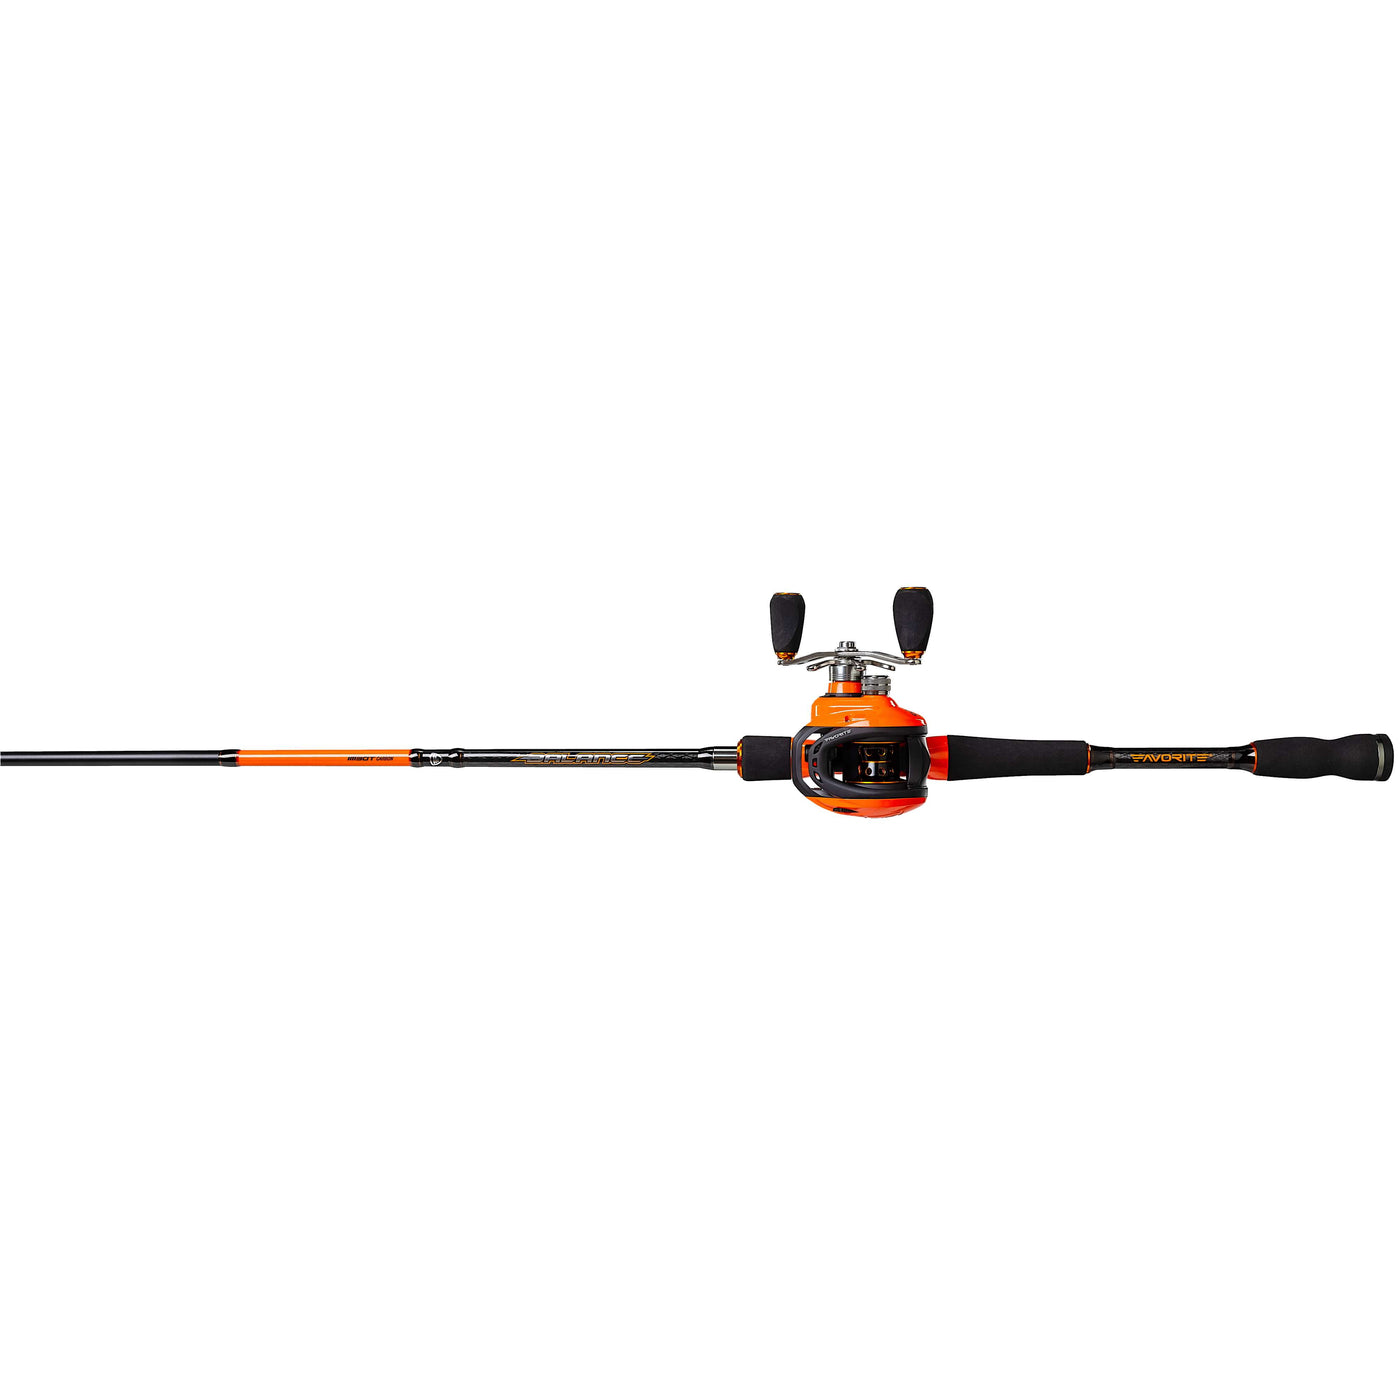 Balance Casting Combo with A Right Handed Reel - Favorite Fishing USA